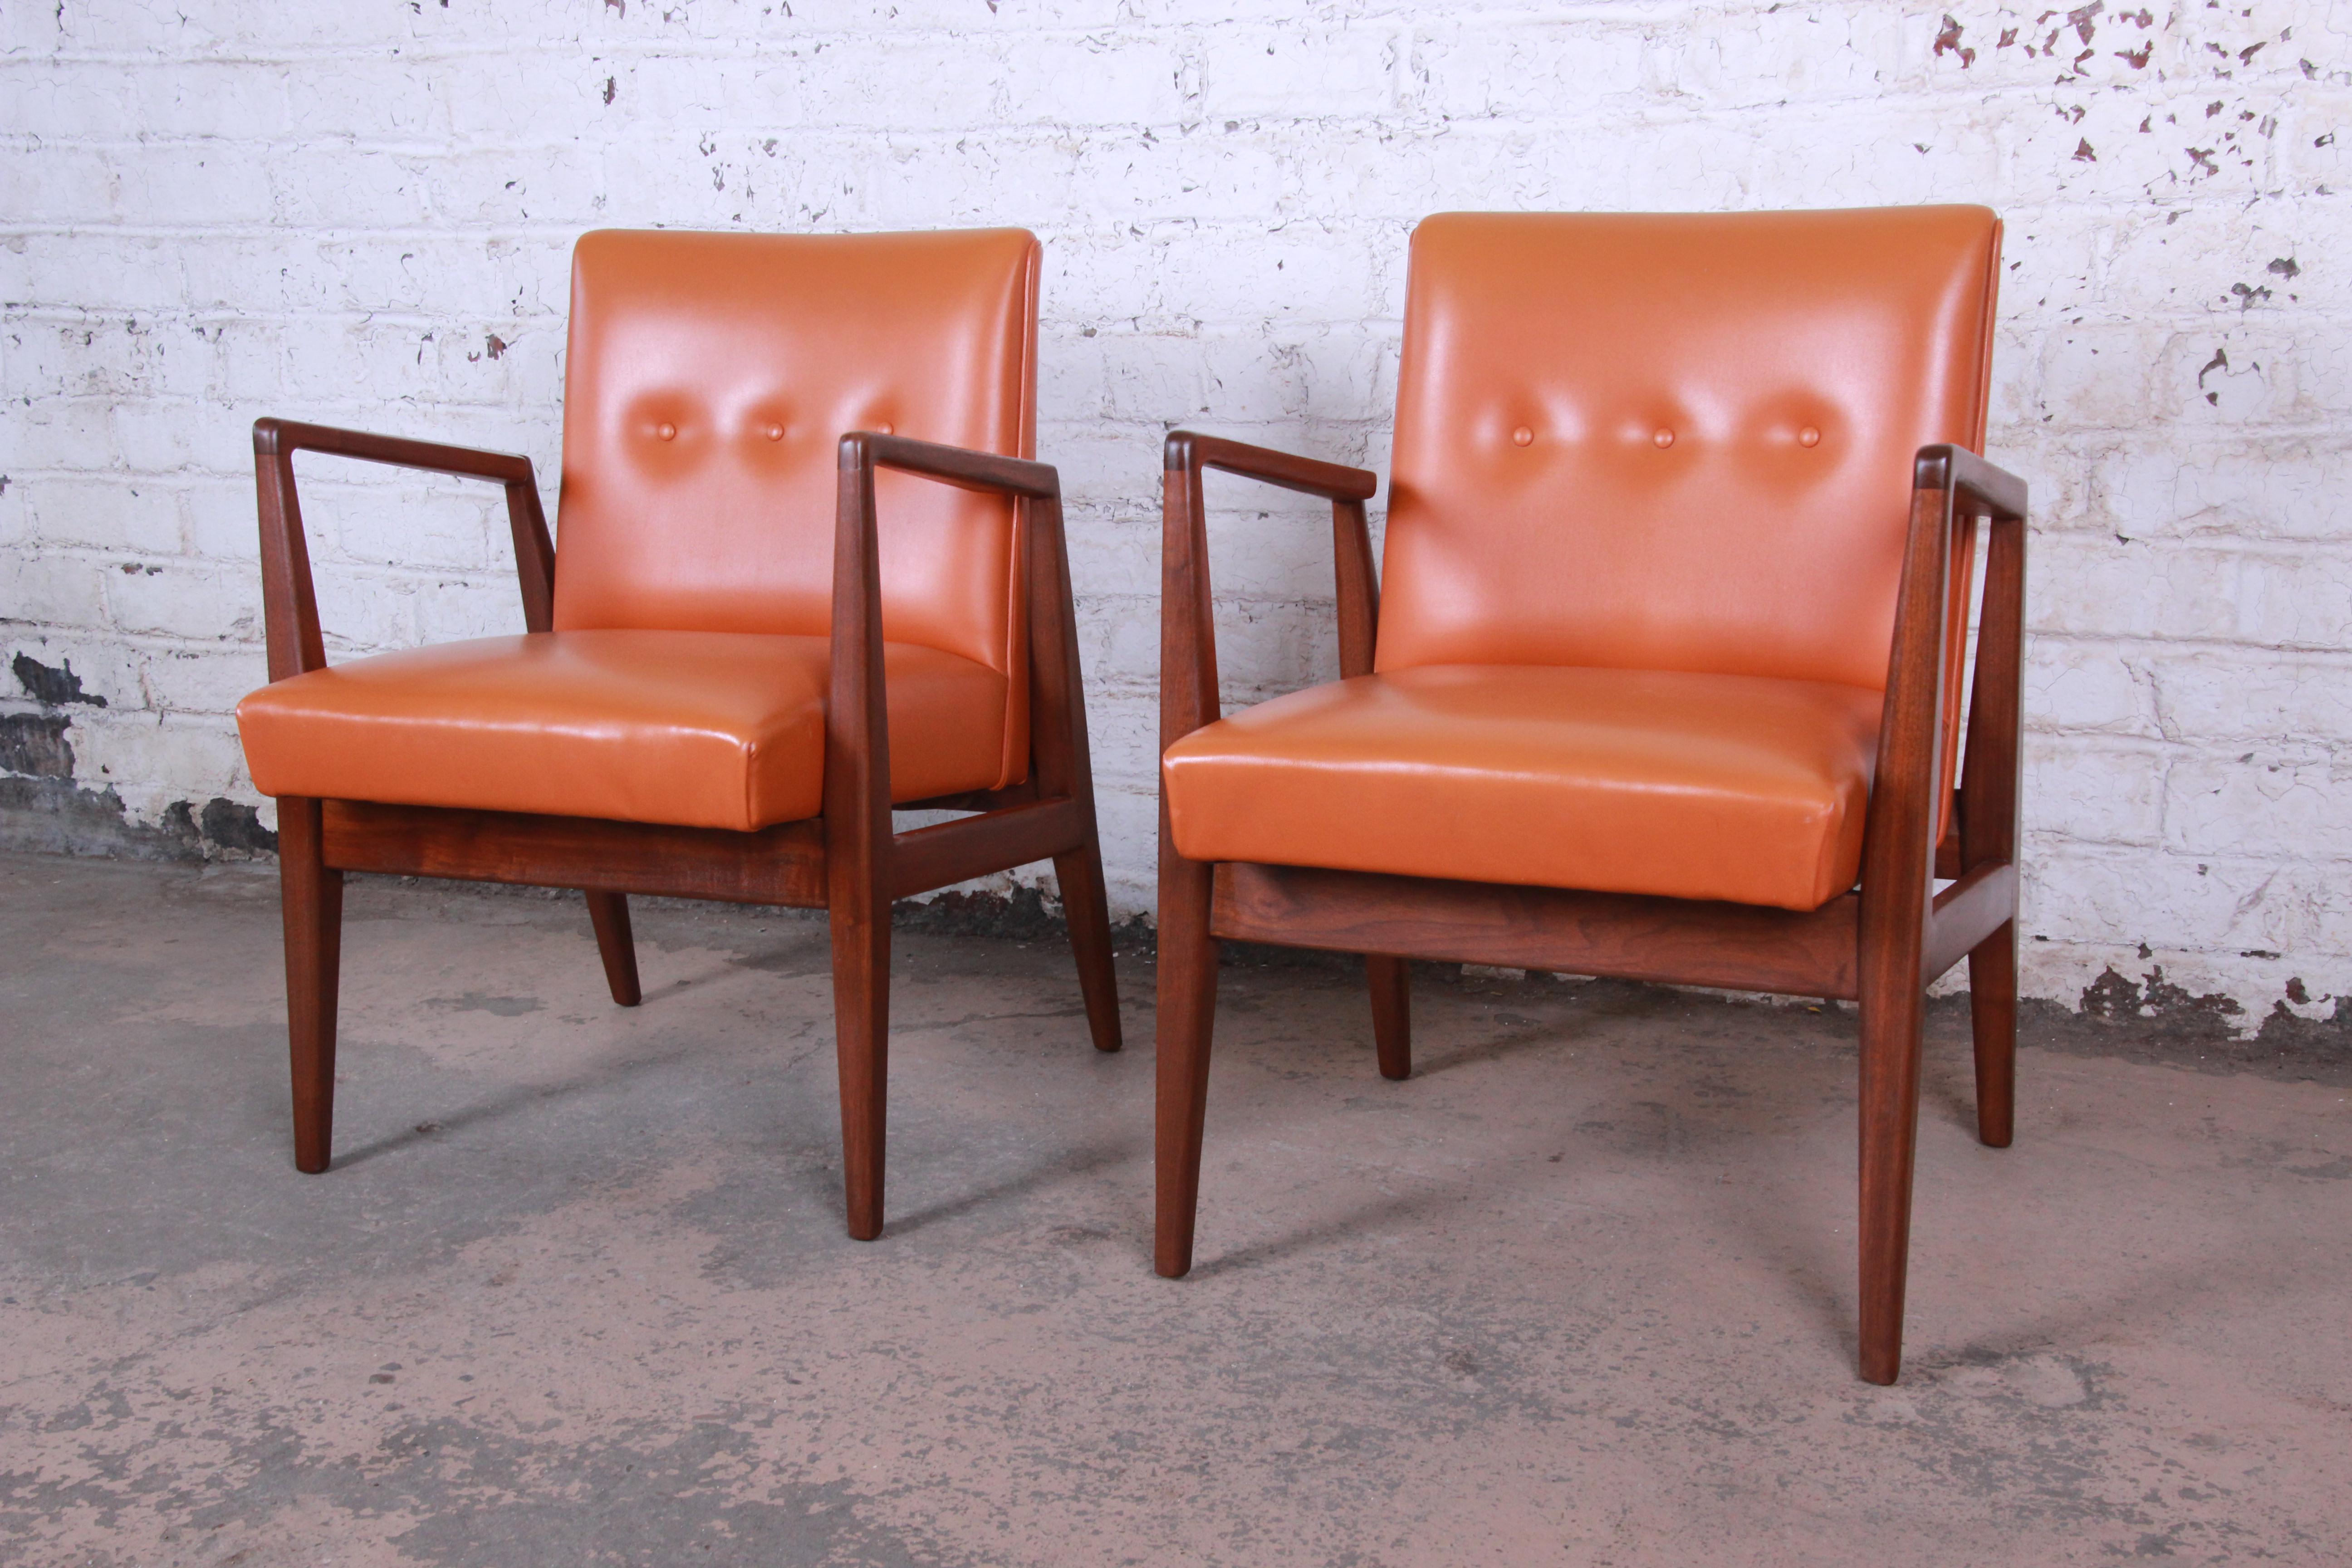 Offering an exceptional pair of Mid-Century Modern sculpted walnut lounge or club chairs designed by Jens Risom. The chairs feature gorgeous solid sculpted walnut frames and original tufted orange vinyl upholstery. The frames have been expertly